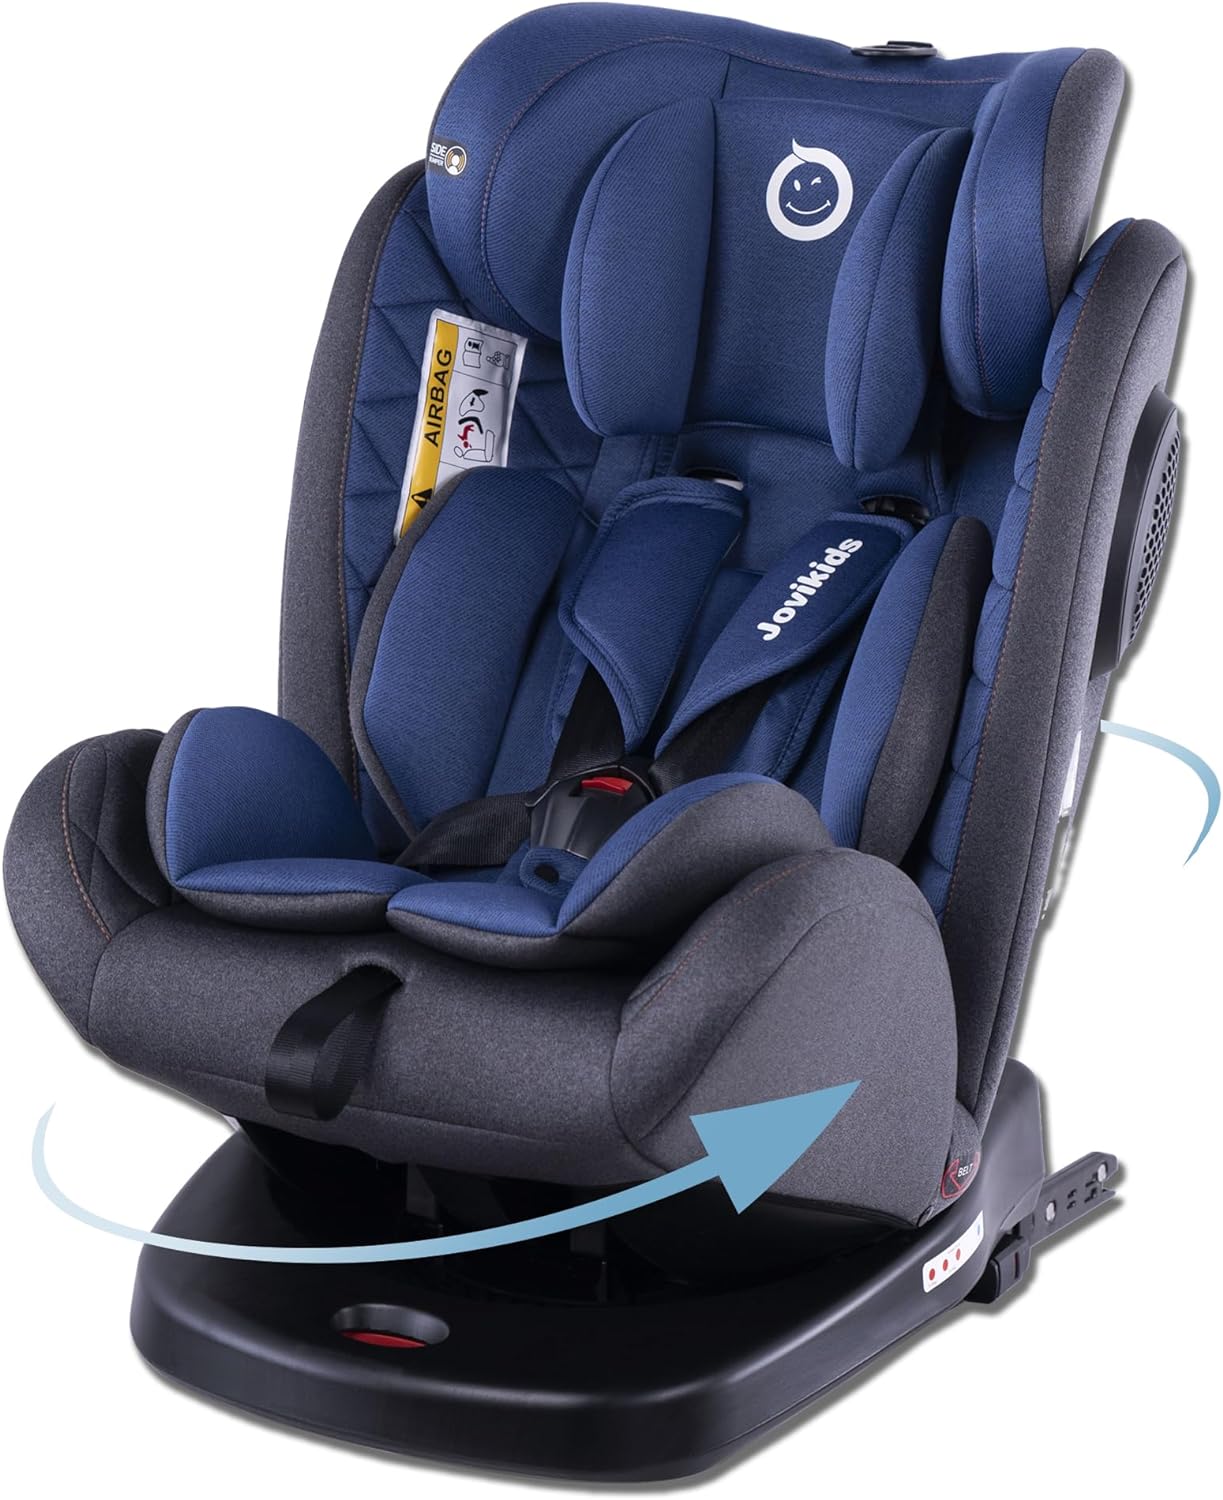 Isofix with Top Tether, 360 Degree Swivel Car Seat Blue, Group 0/1/2/3, 0-12 Years Old